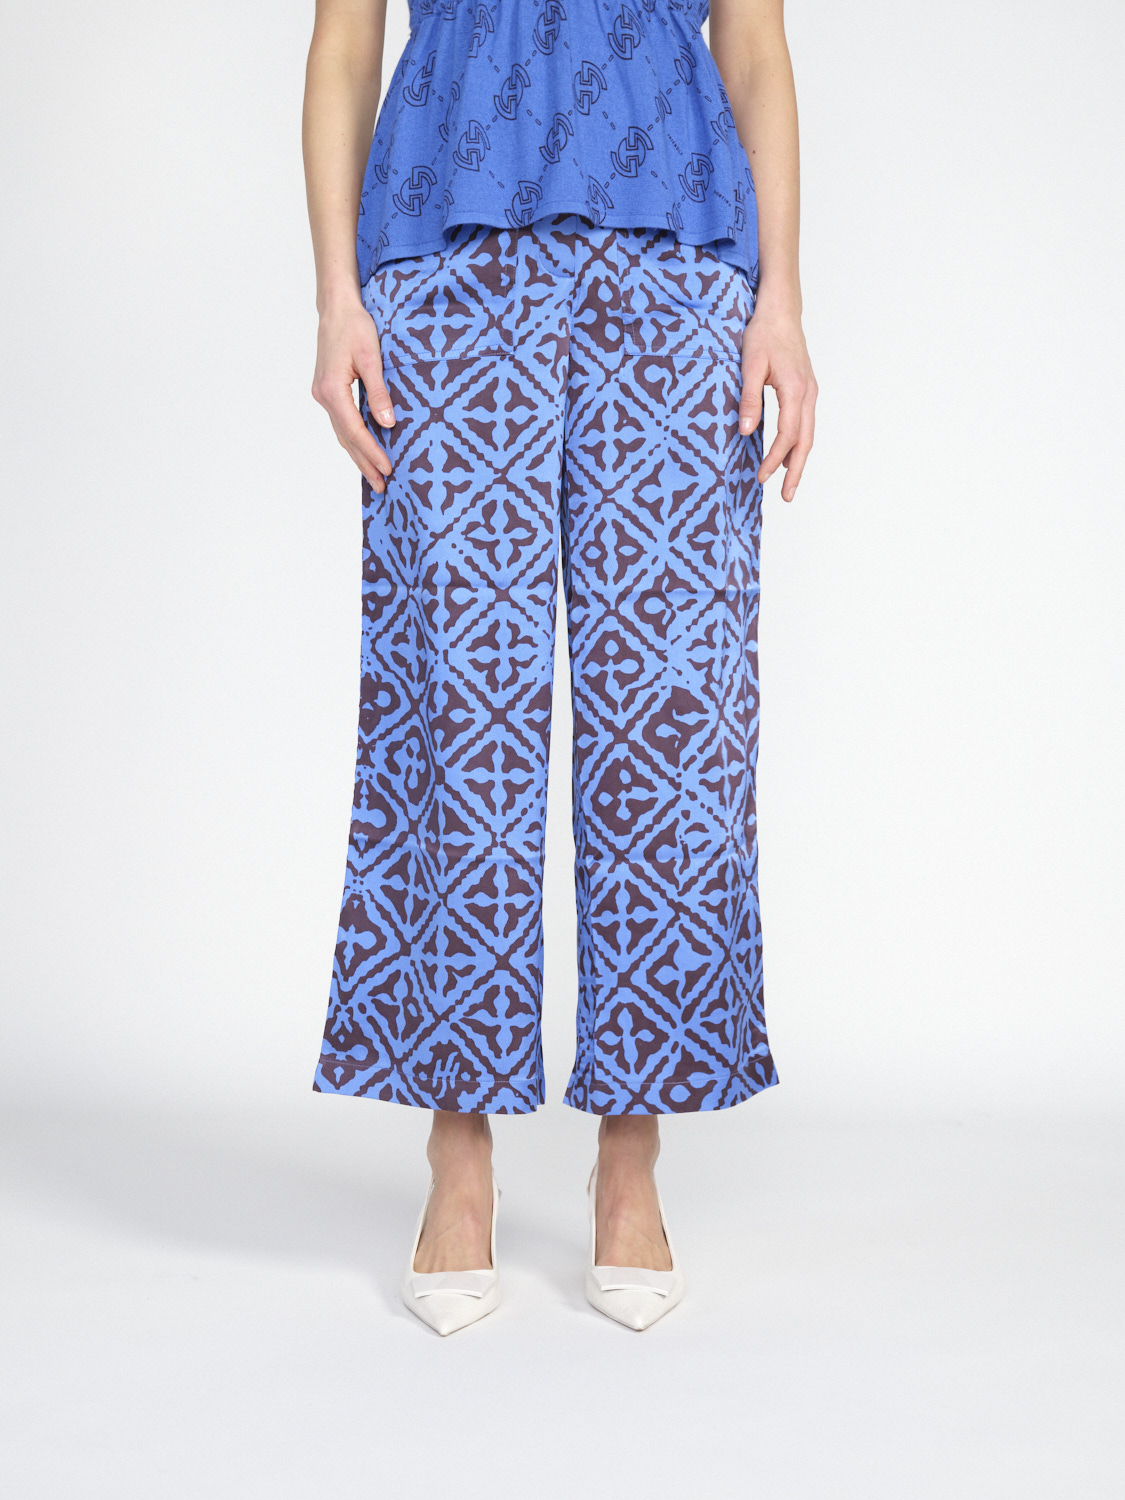 friendly hunting Baja – Stretchy silk trousers with a graphic pattern  blue S